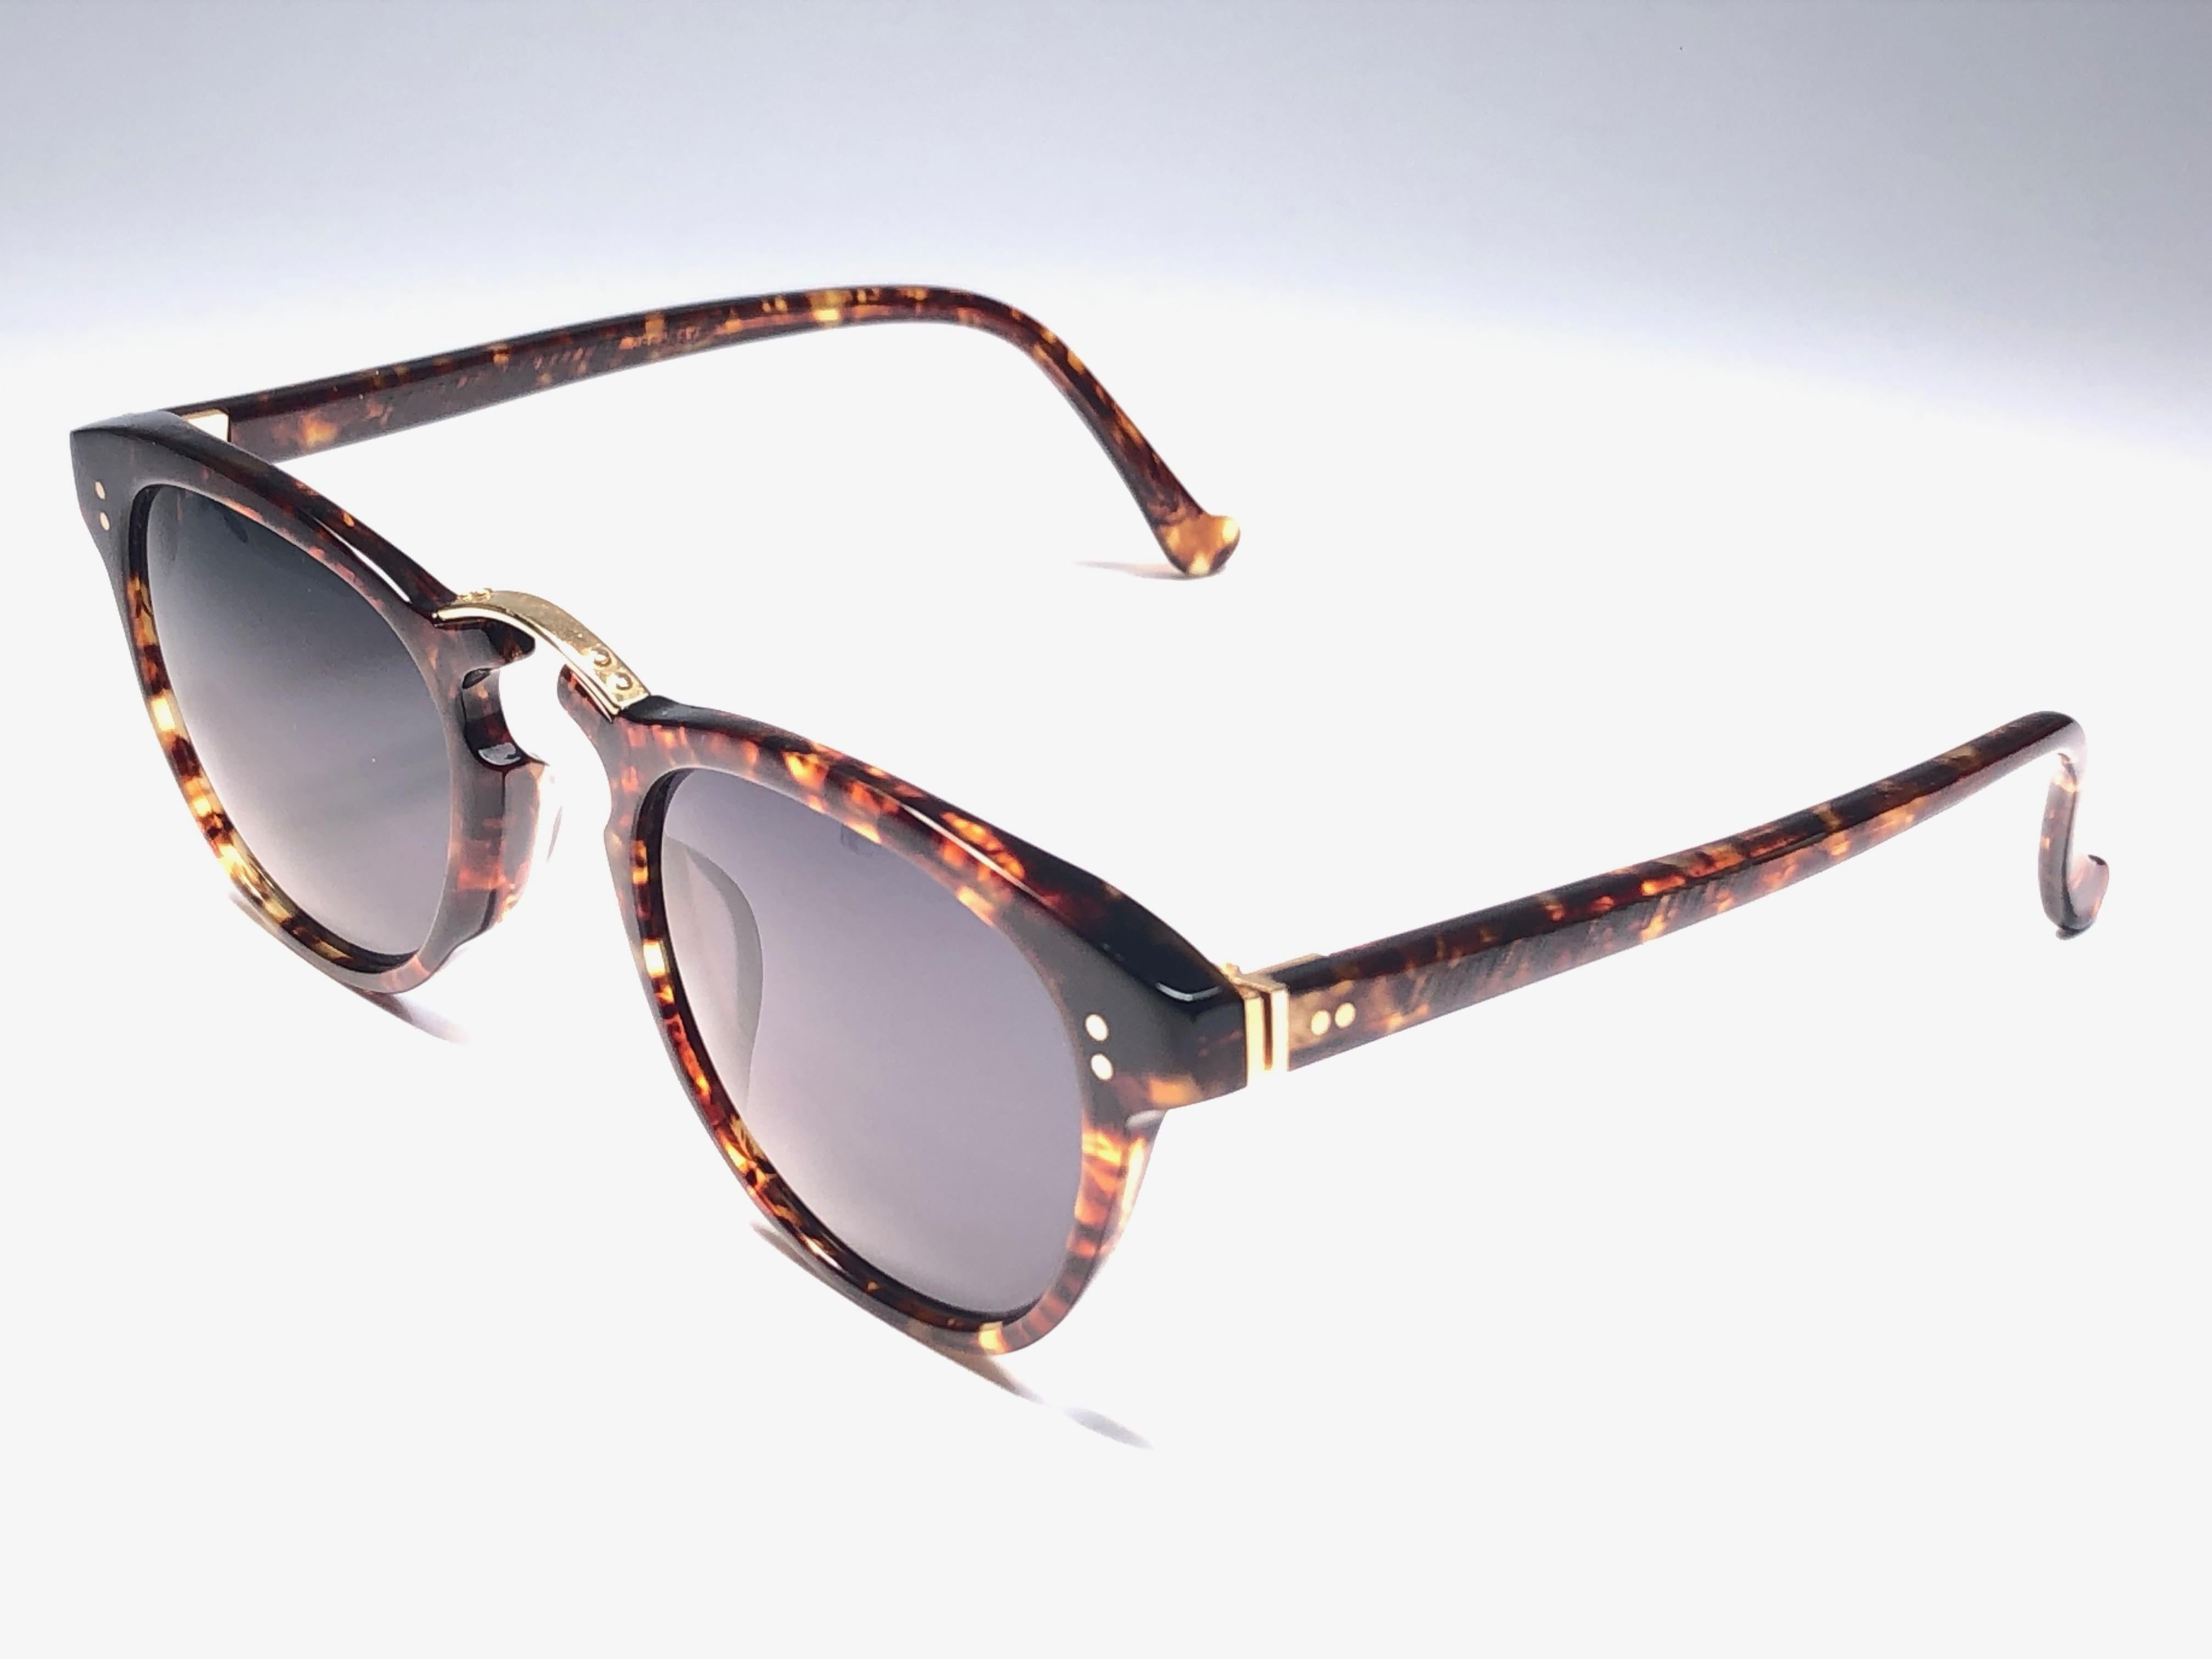 New Vintage Jean Paul Gaultier 58 0272 Dark Tortoise Japan Sunglasses  In New Condition For Sale In Baleares, Baleares